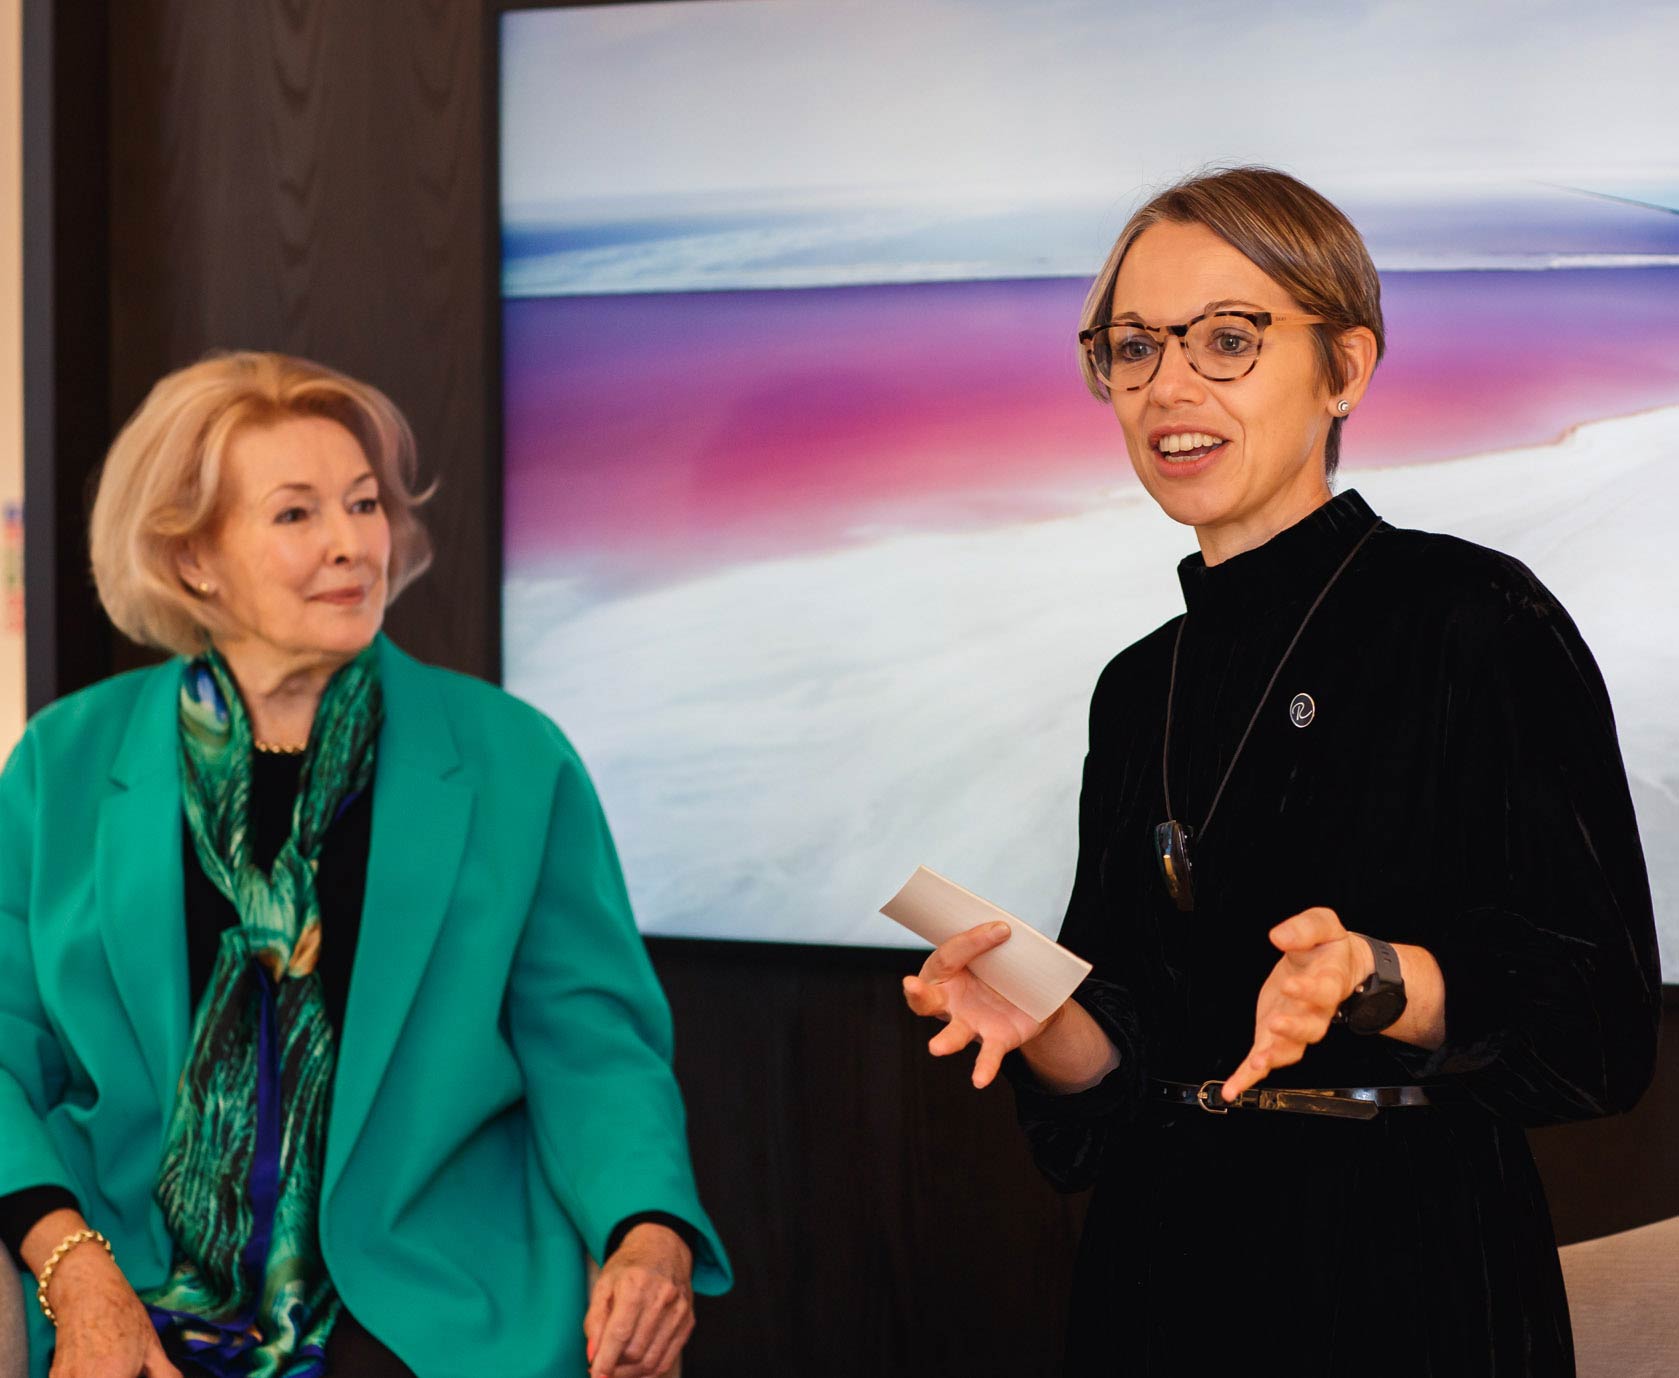  Diana Moran and Dr Zoe Wyrko host an event on well-being as a way of life